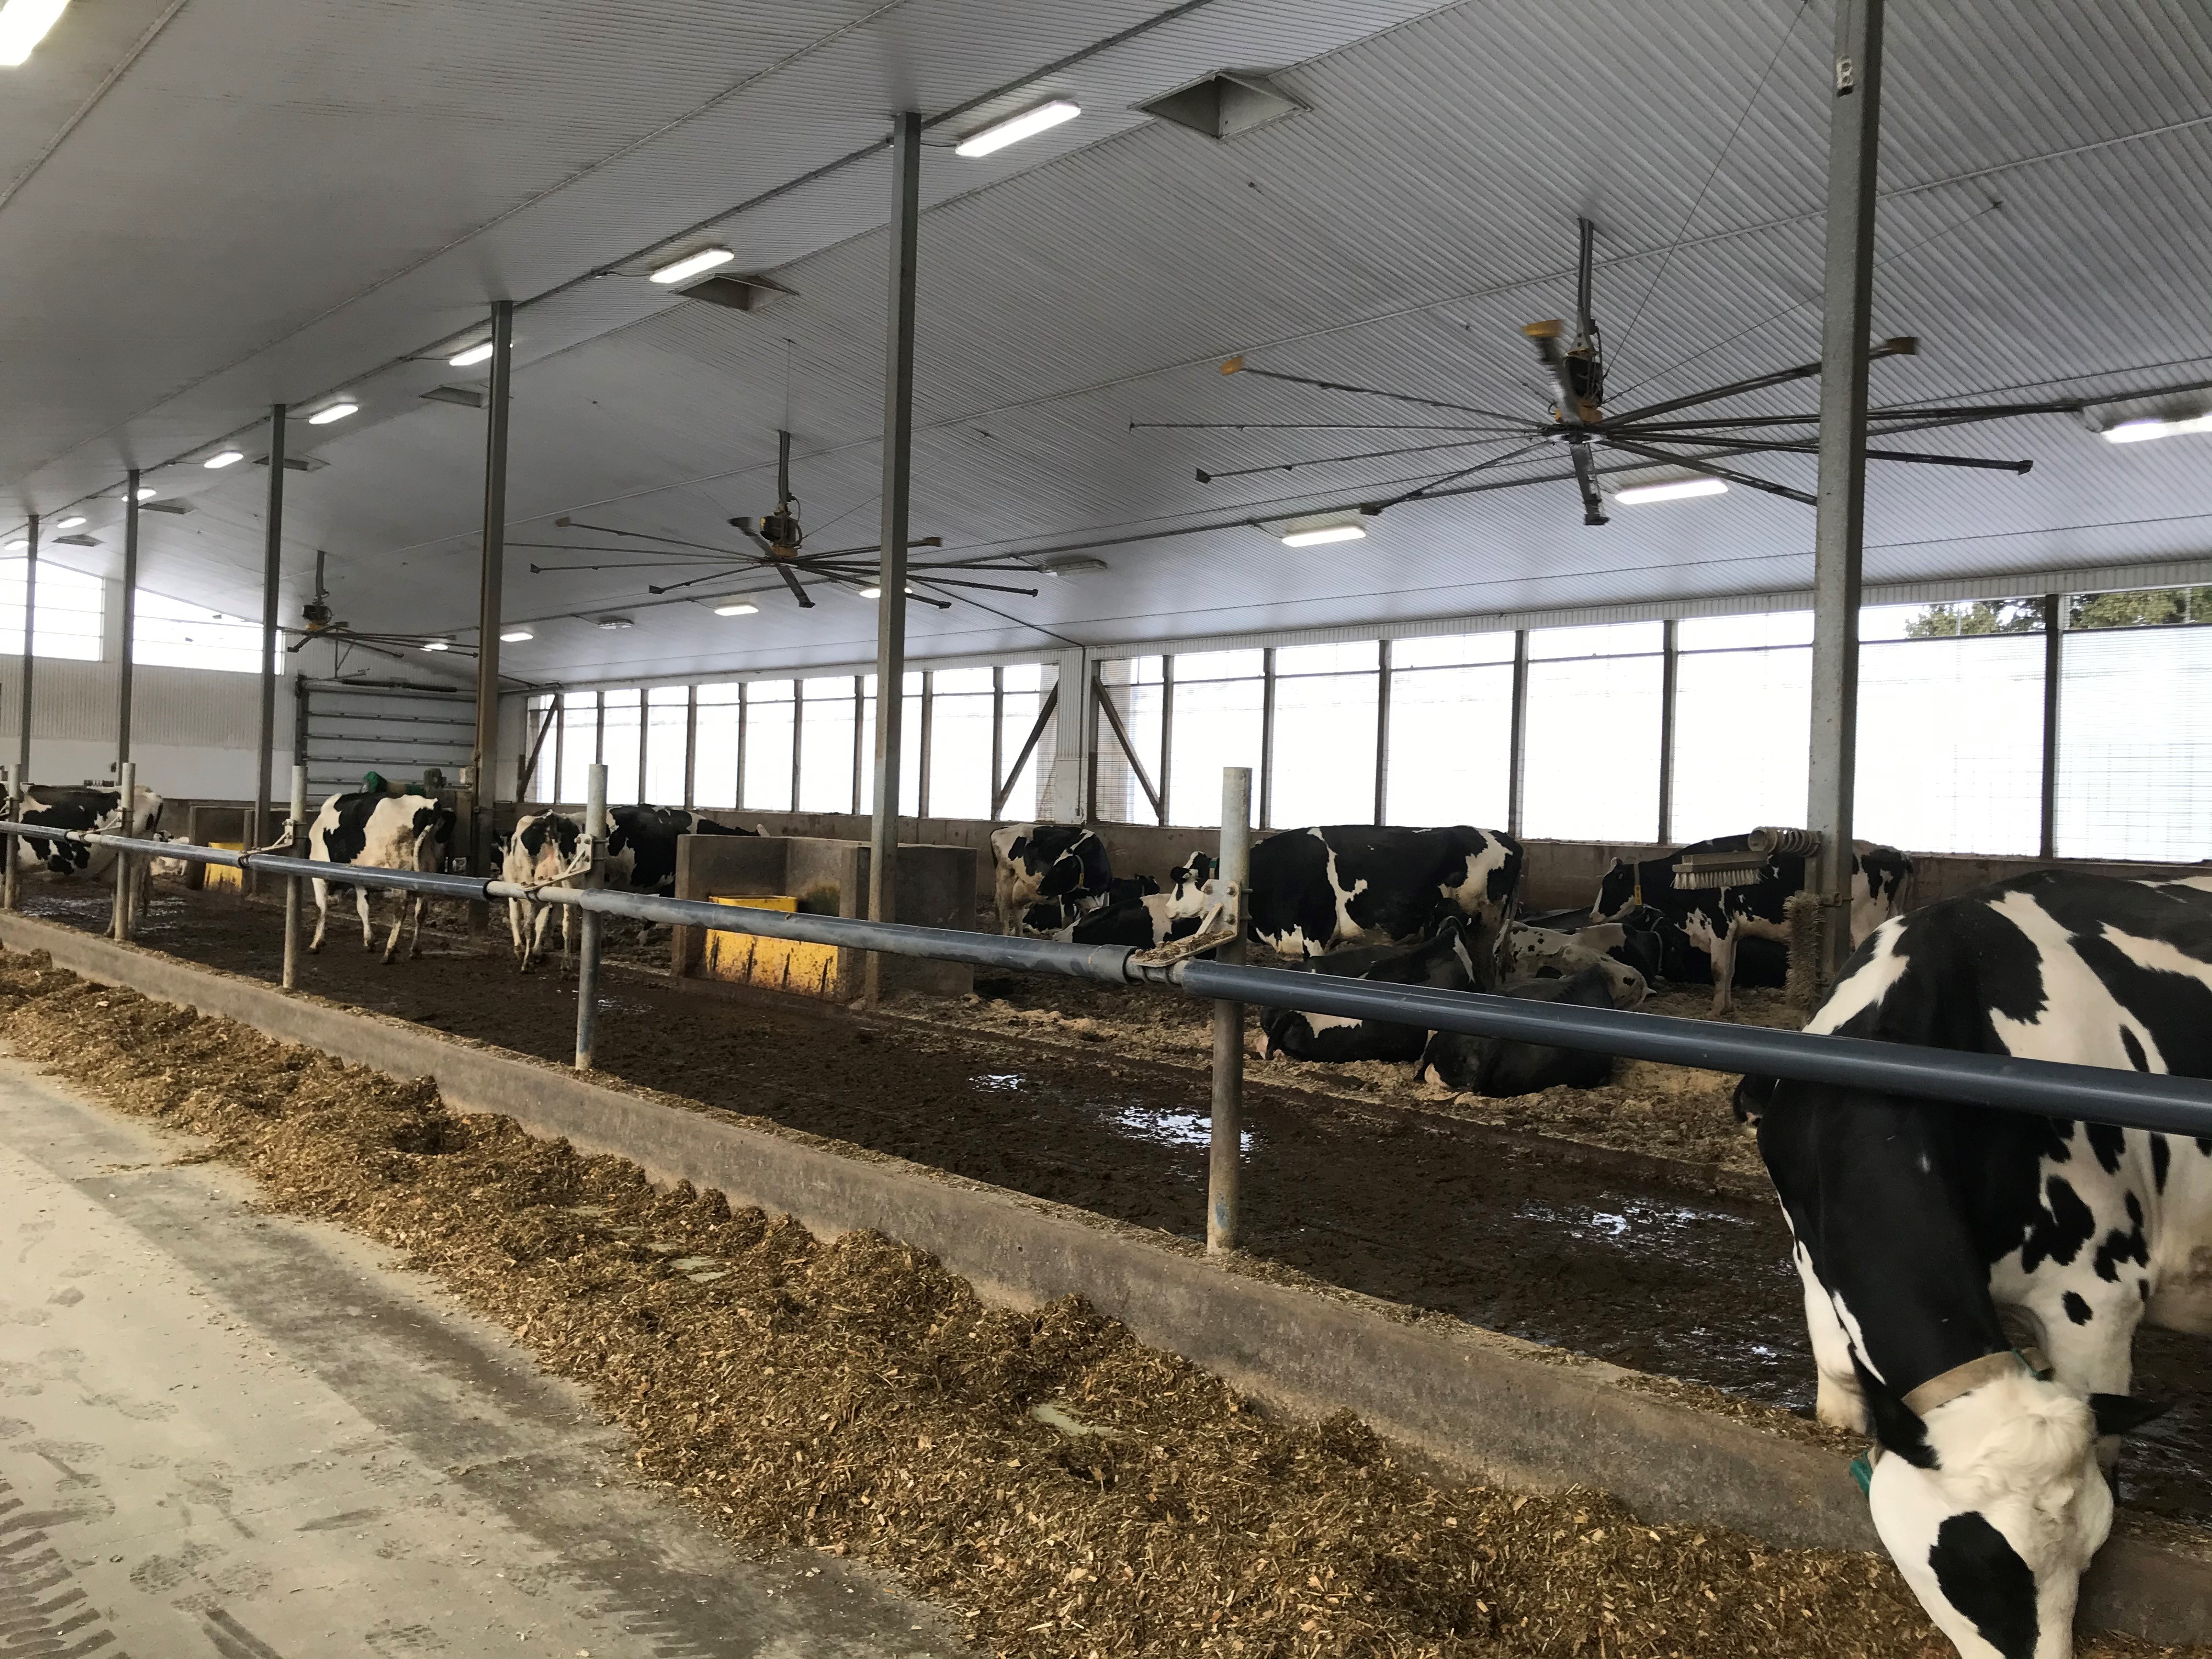 High-volume low-speed fans in a Compost-bedded pack barn